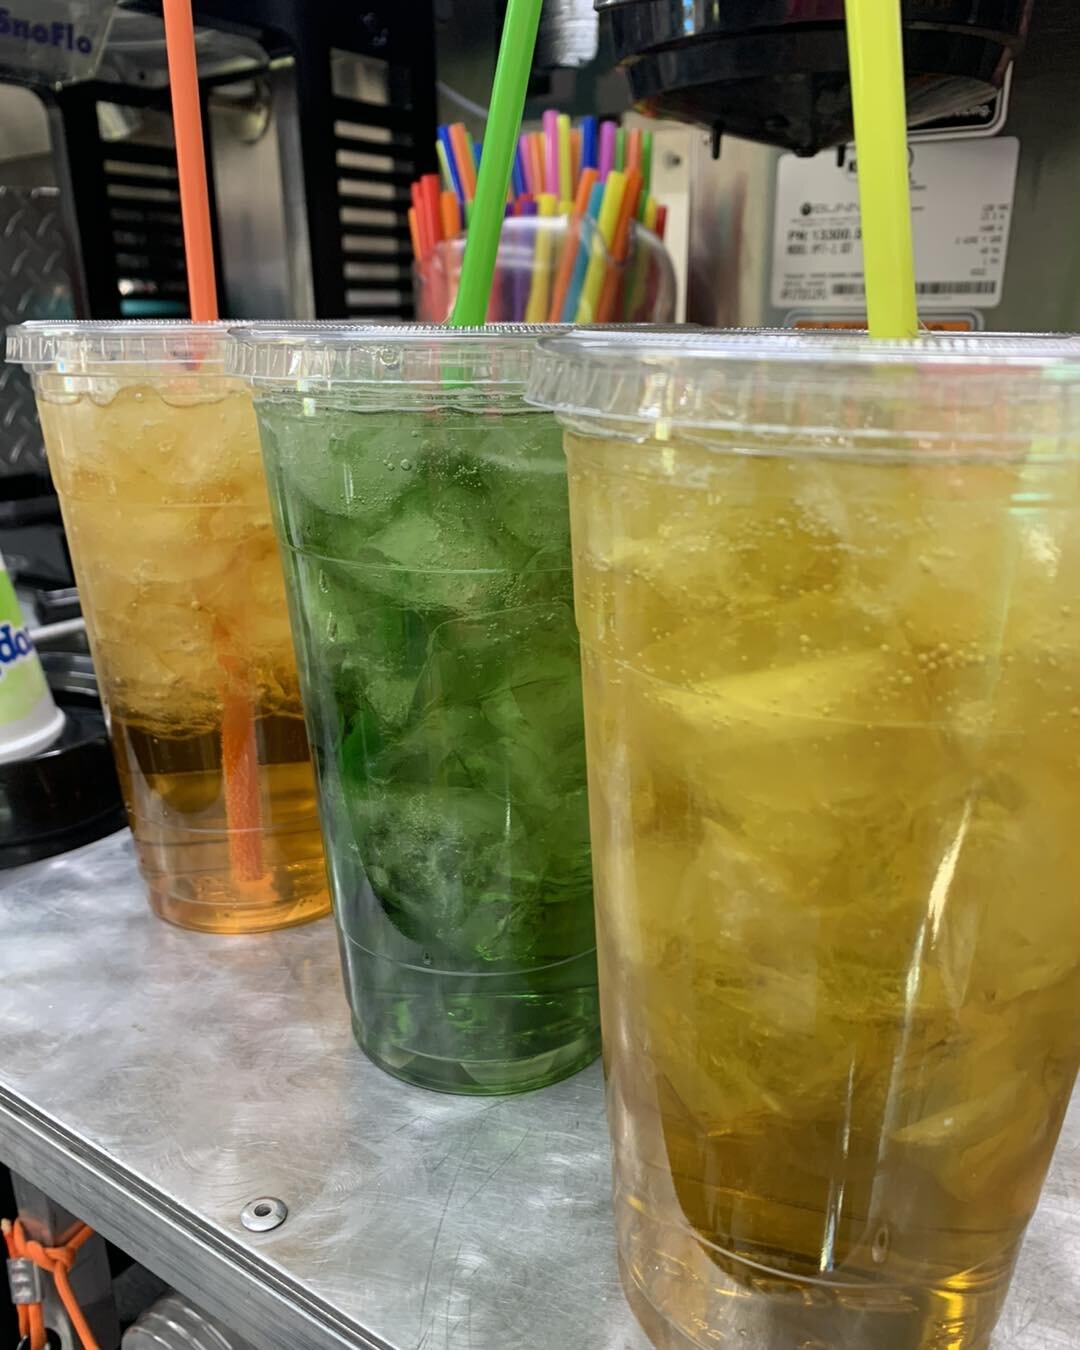 Redbull&hellip;redbull&hellip;redbull&hellip;what flavors do you like to put in yours? We have over 25 flavors to choose from! 

#redbulllovers #redbulllovers👑 #weappreciateyou #sugarwagon208 #meridian #foodtrucks